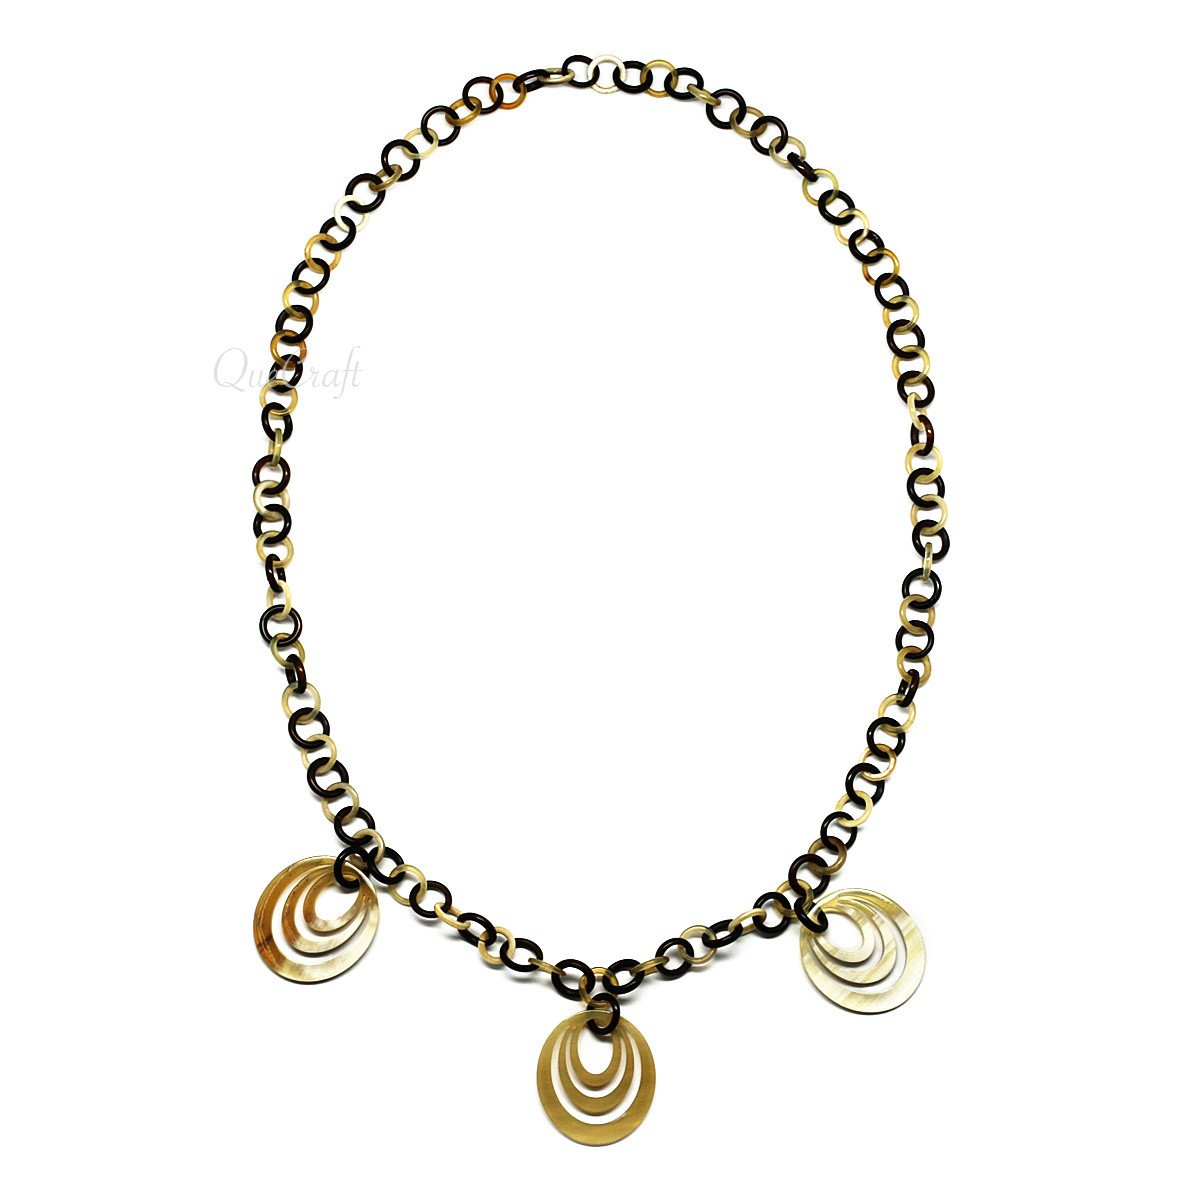 Horn Chain Necklace #4157 - HORN JEWELRY